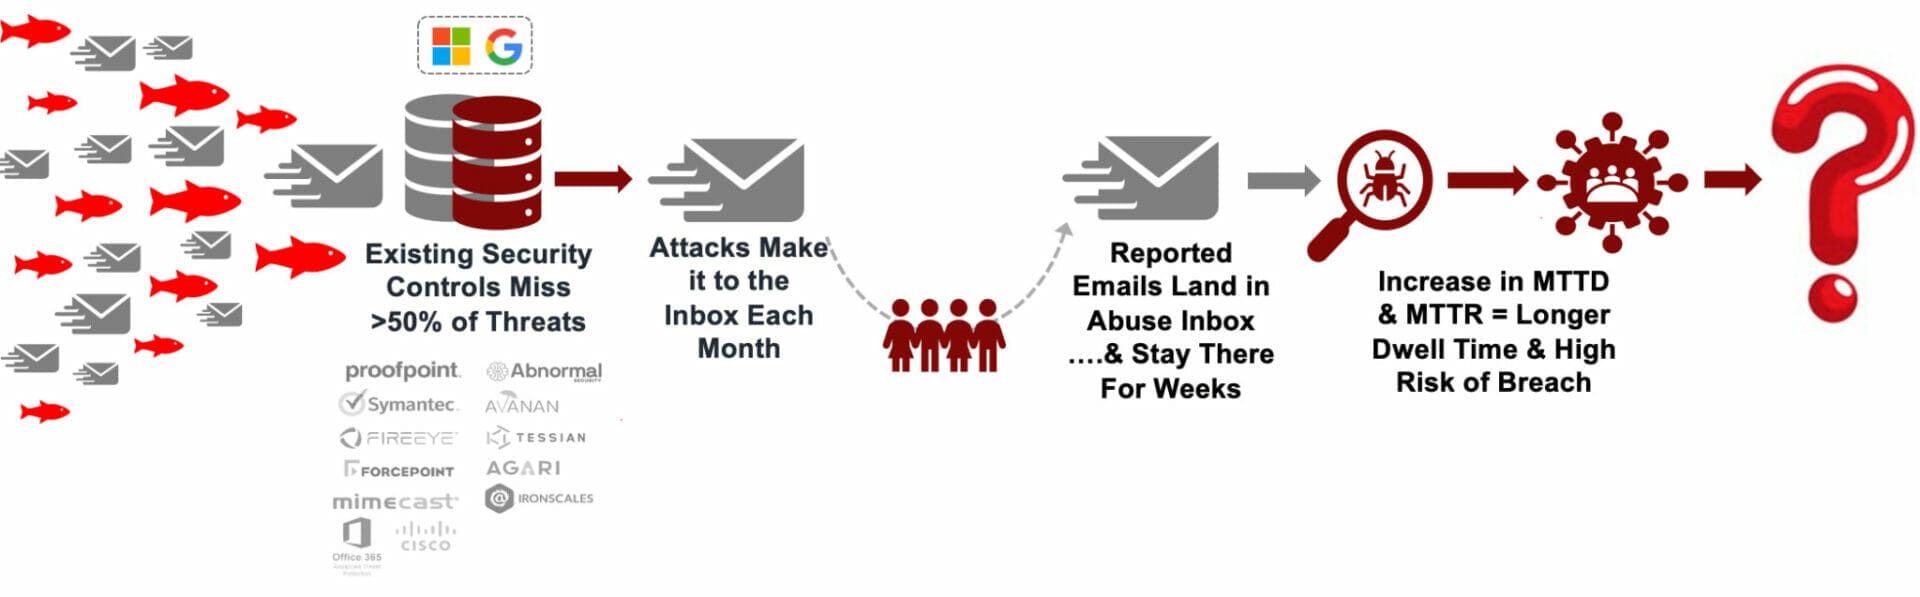 Email security graphic highlighting the importance of email protection and threat prevention